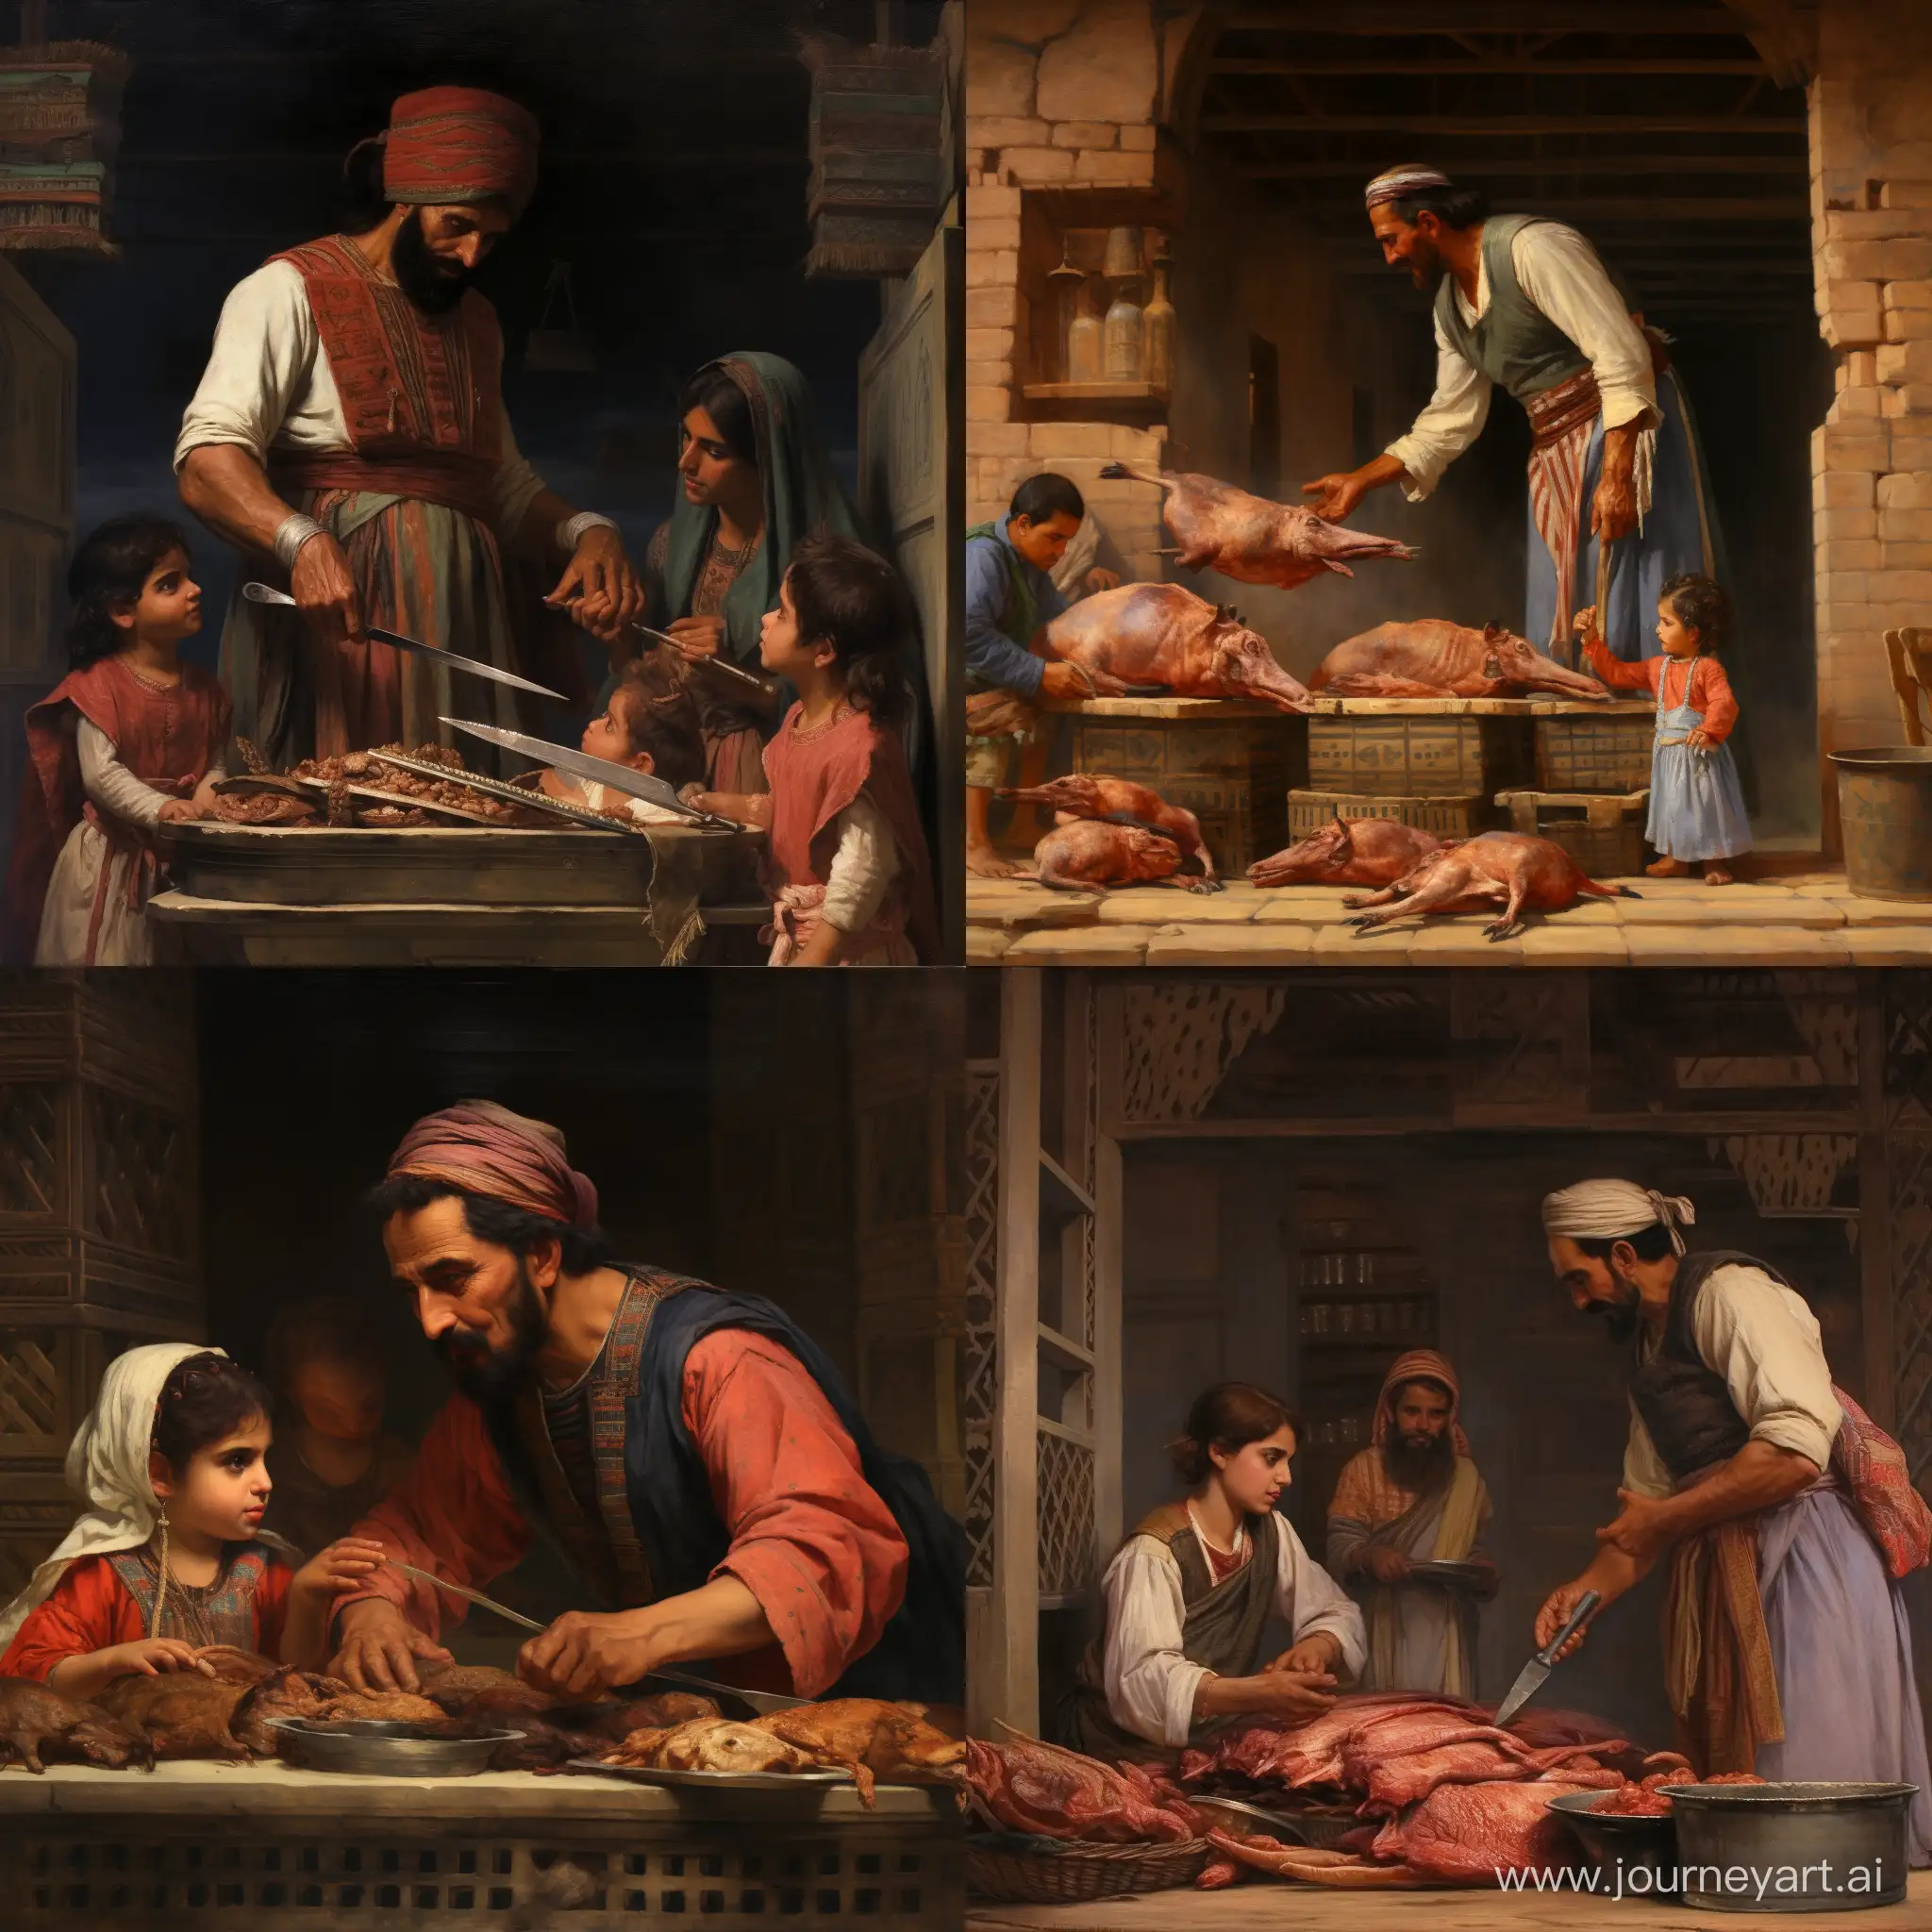 Egyptian-Butcher-Discussing-Family-with-Wife-and-Children-at-Work